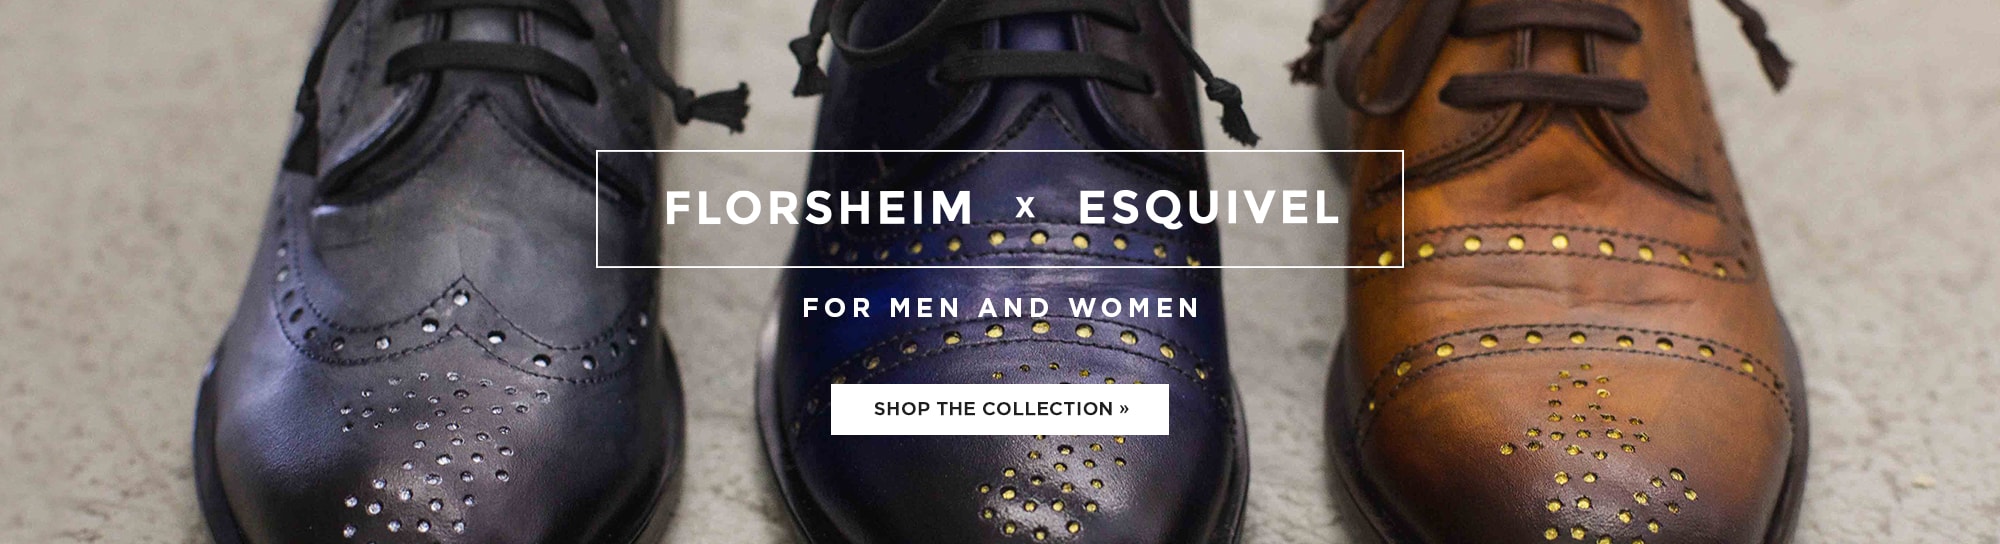 Florsheim x Esquivel :: Fall Collection (2016) :: Edgy silhouettes in unexpected, hand-burnished color combinations -- An extraordinary USA made collaboration :: SHOP THE COLLABORATION